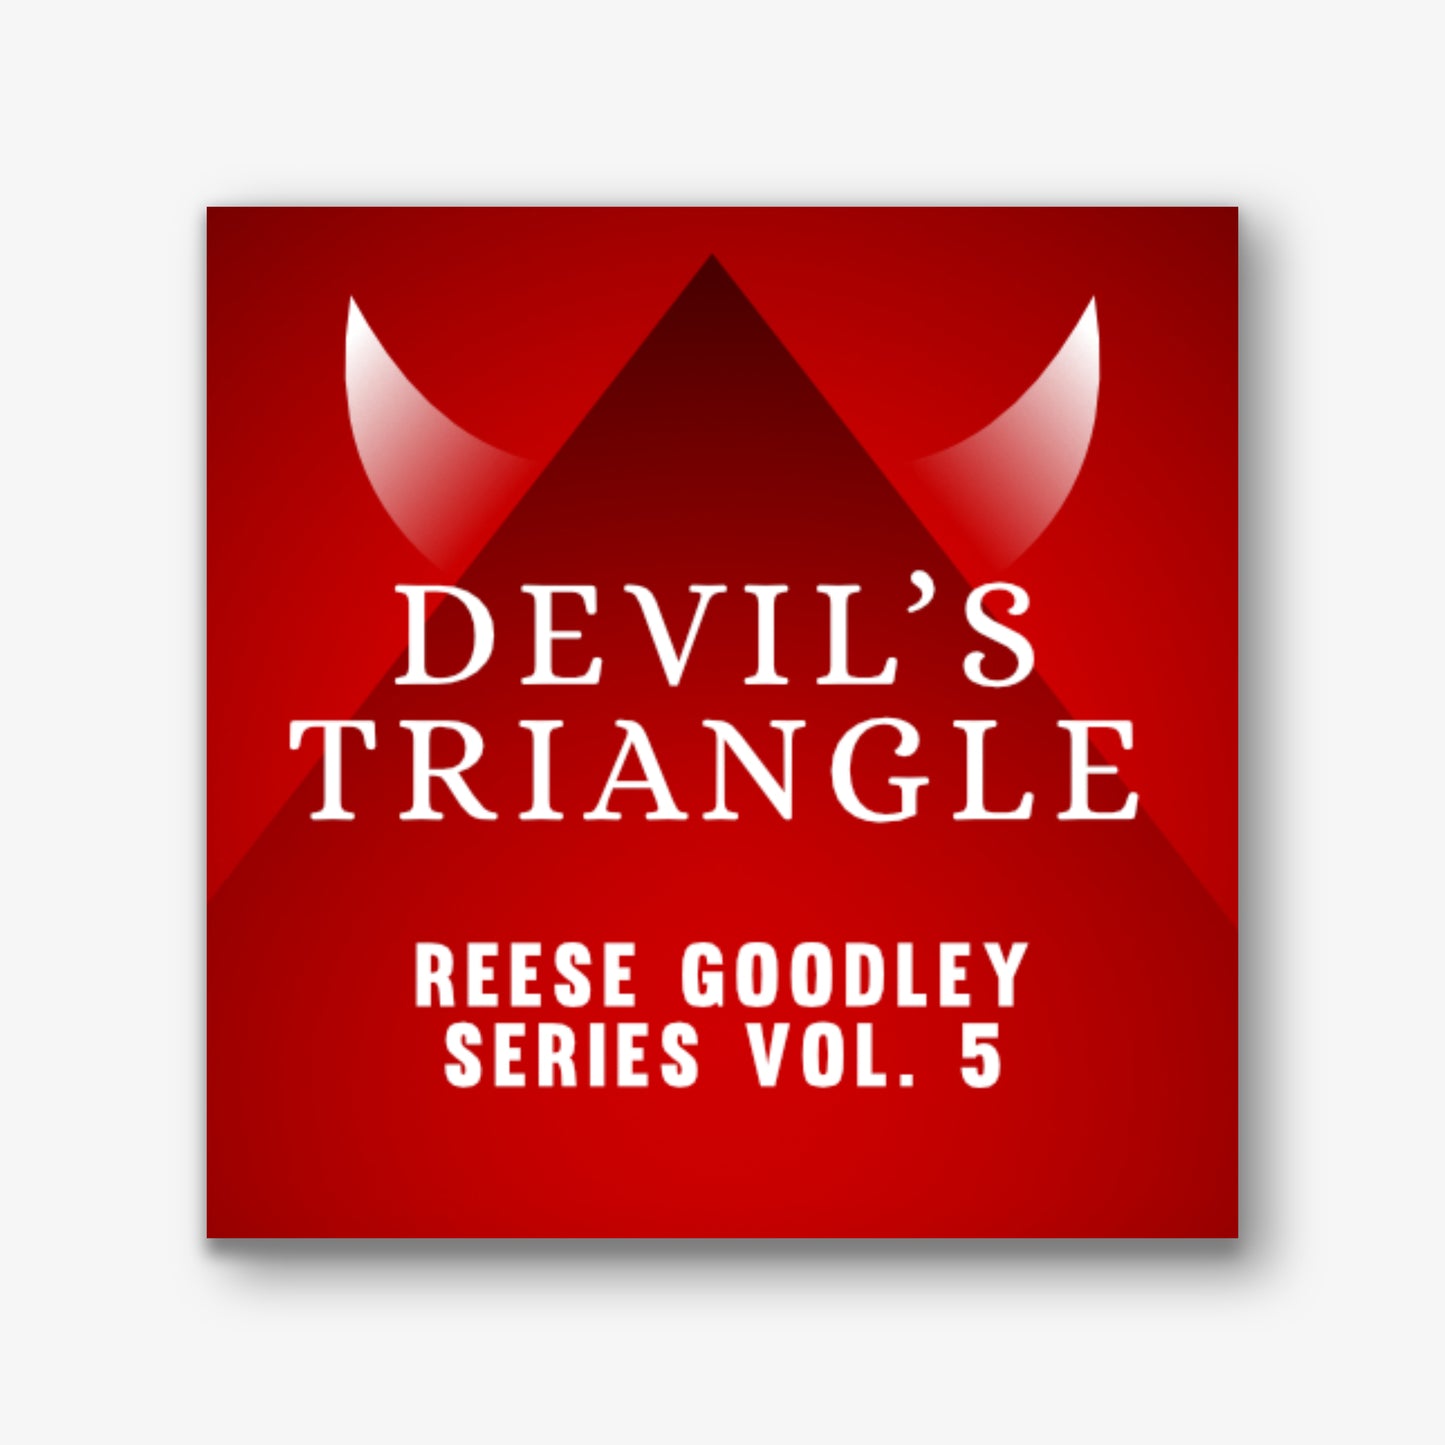 Devil's Triangle - Vol. 5 Reese Goodley Series